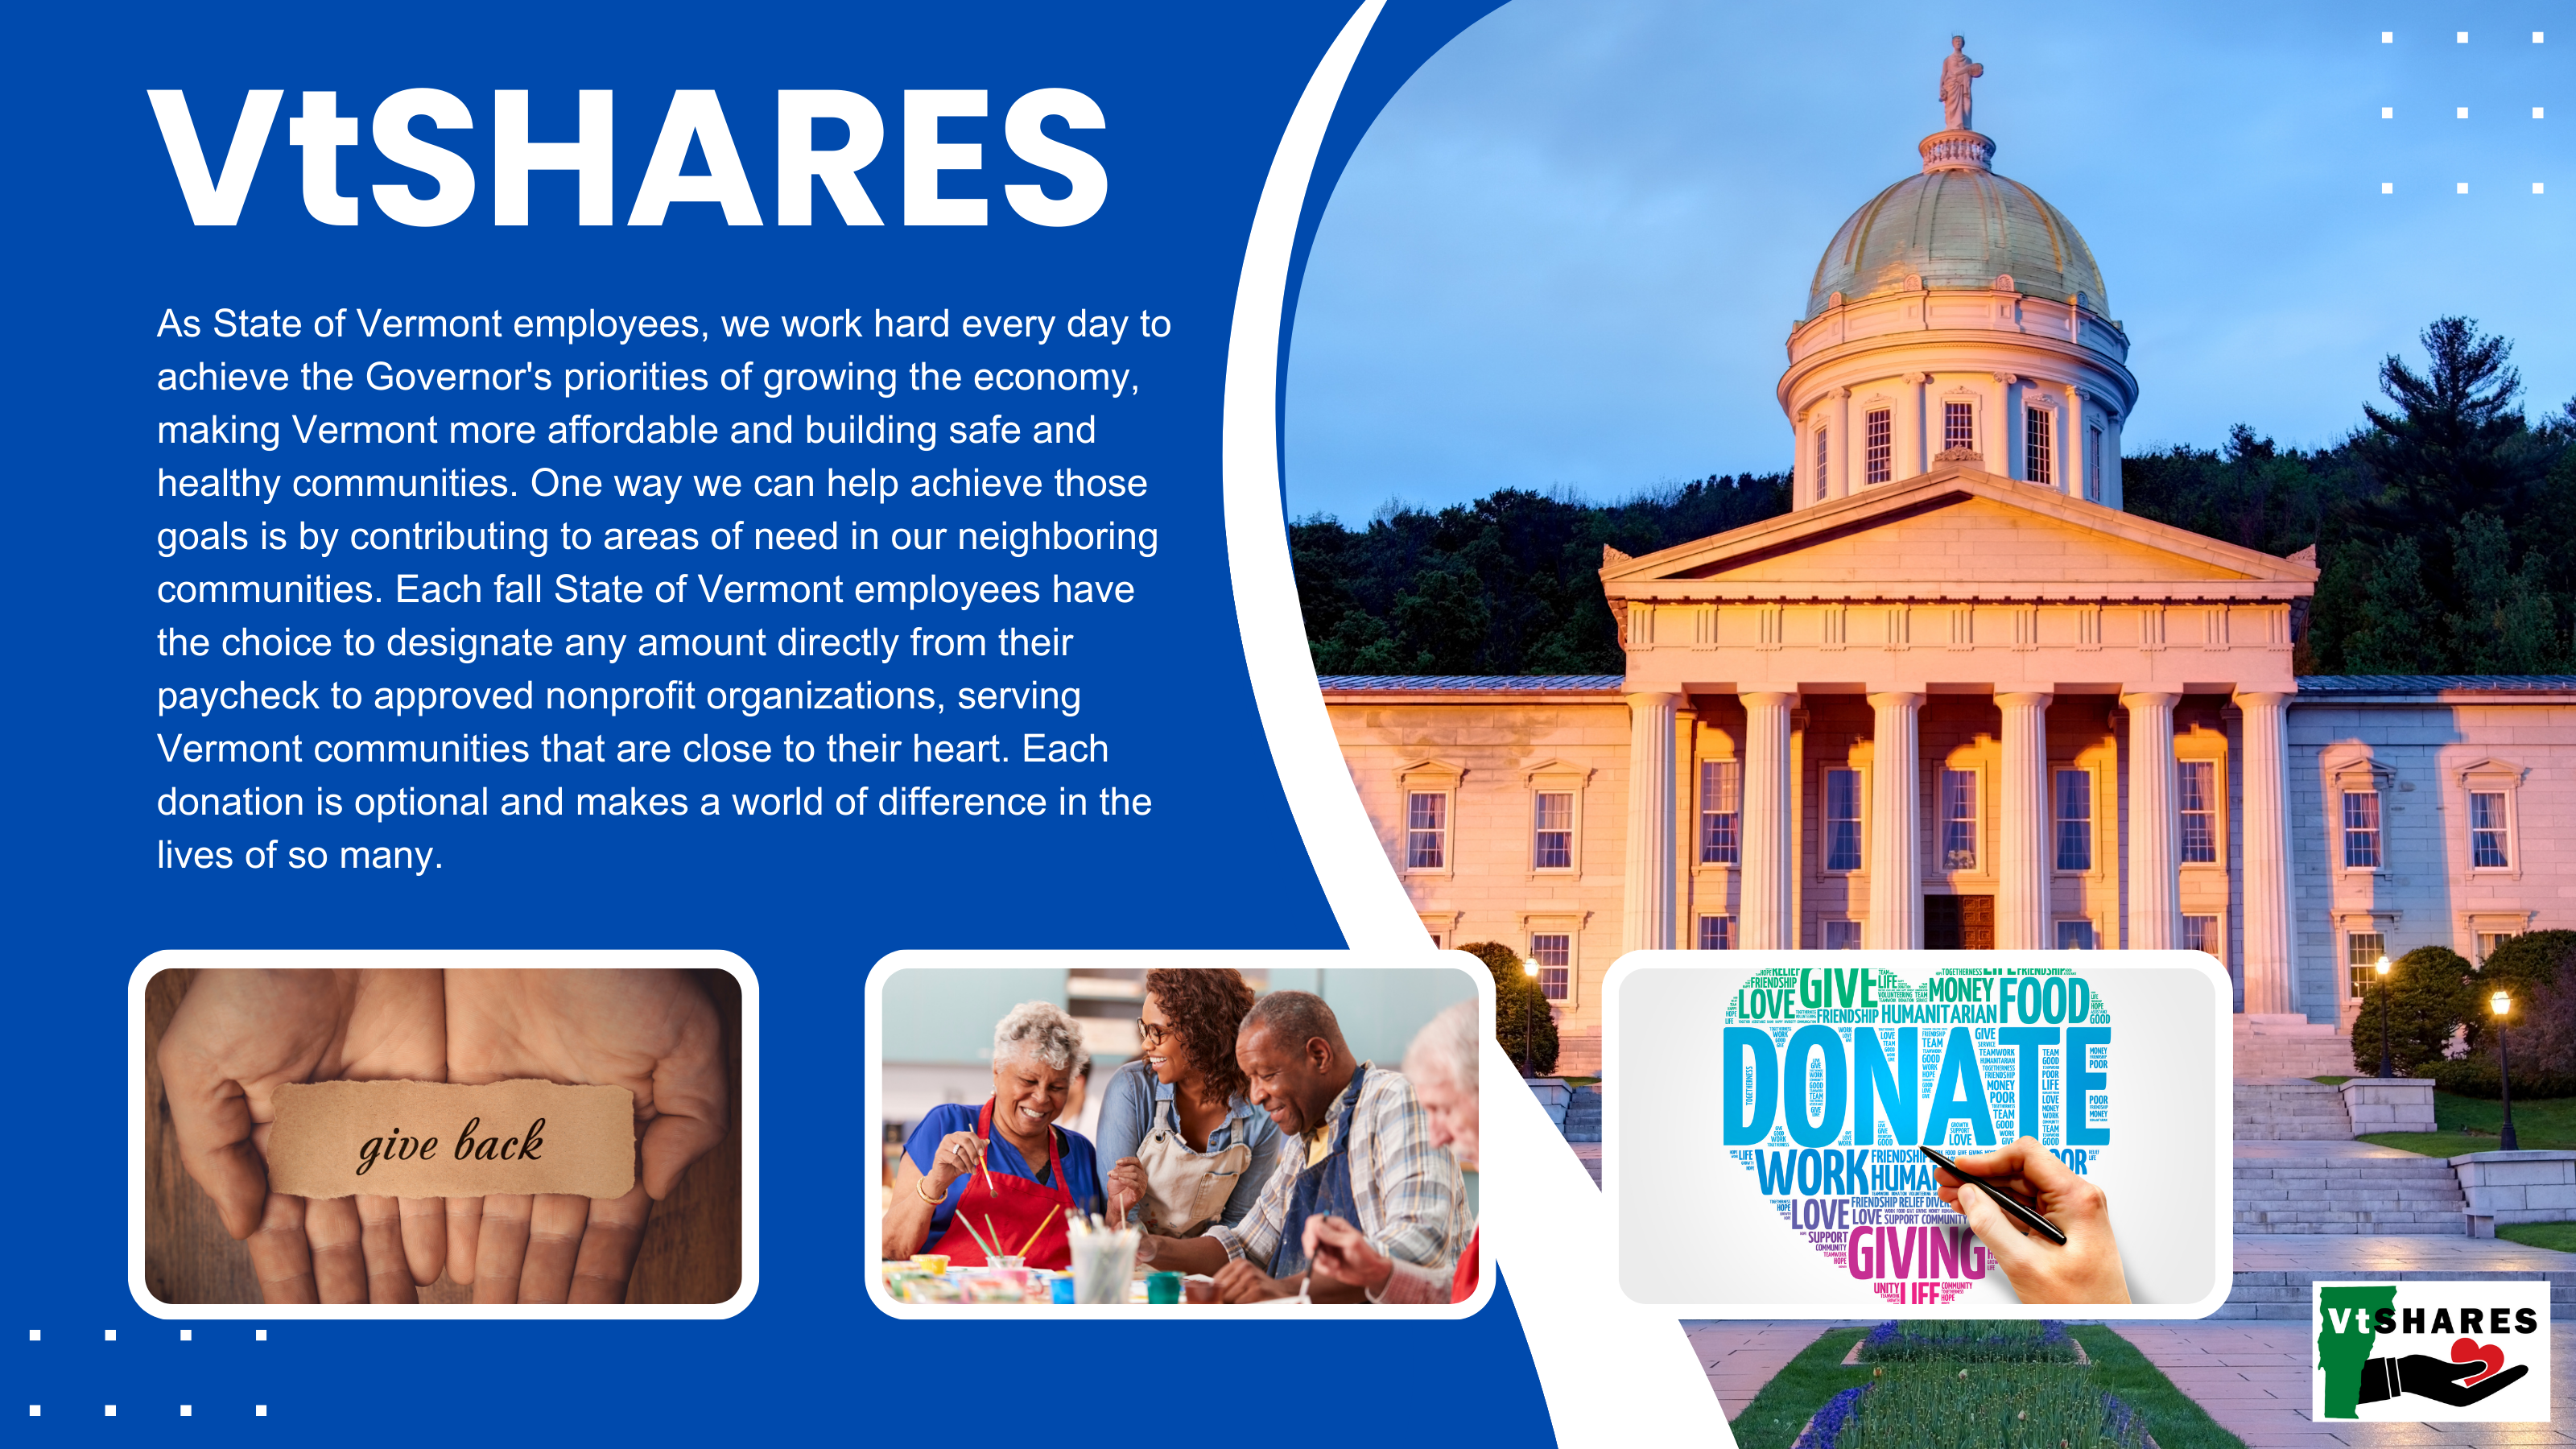 Blue background to left with a white stone capital building on the right. 3 smaller graphics on the bottom with hands saying "give back", diverse people painting, and a heart that says Donate.